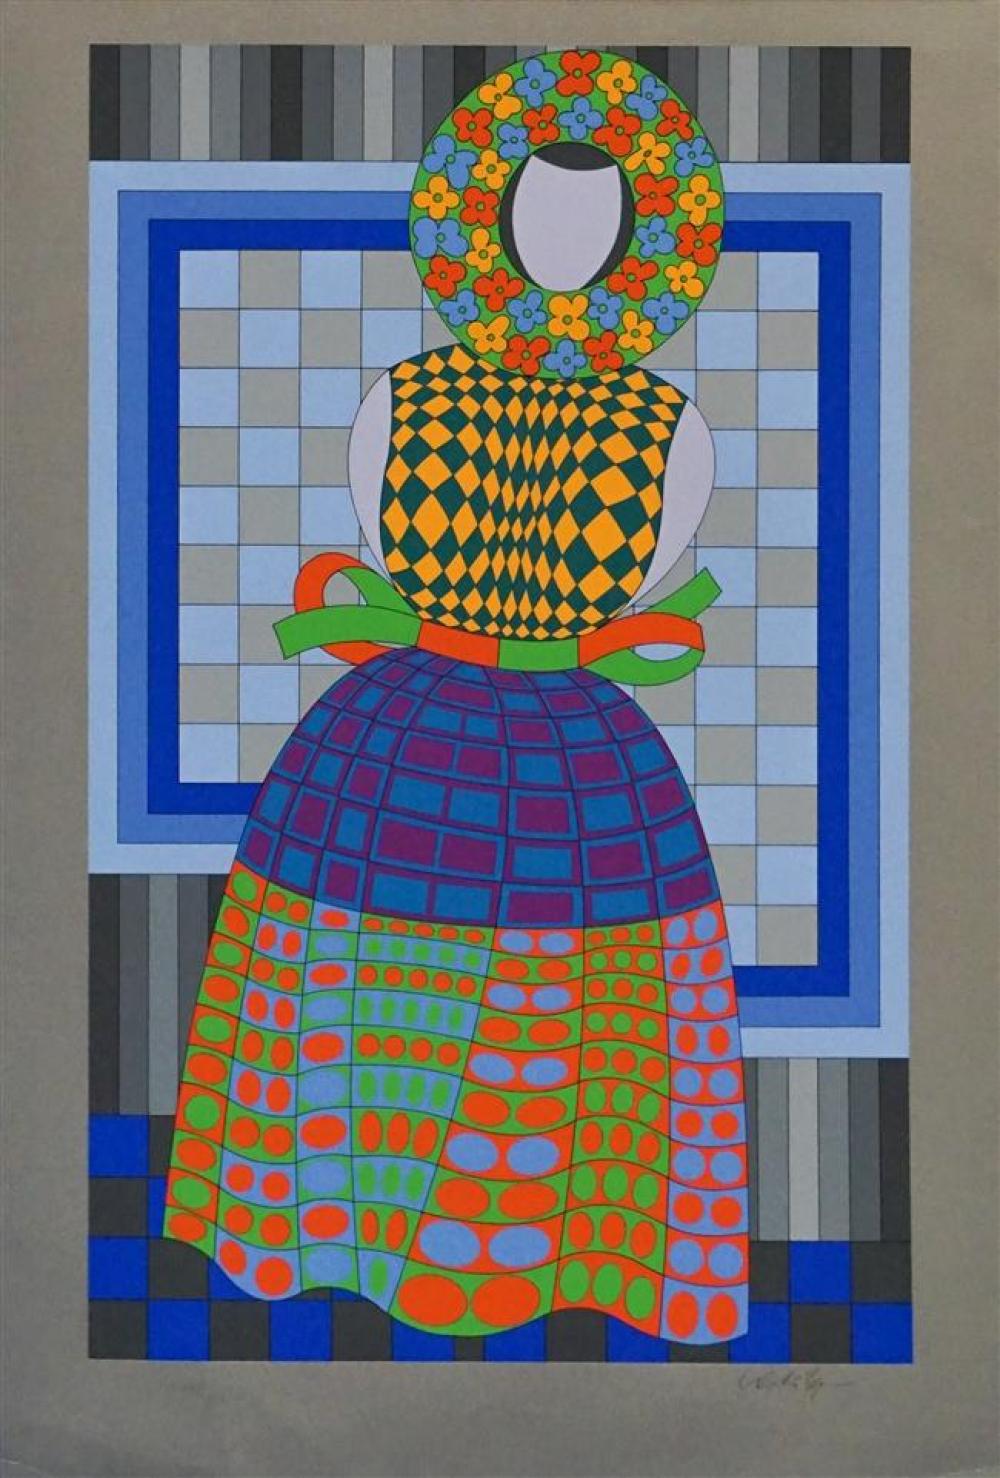 VICTOR VASARELY (FRENCH/HUNGARIAN